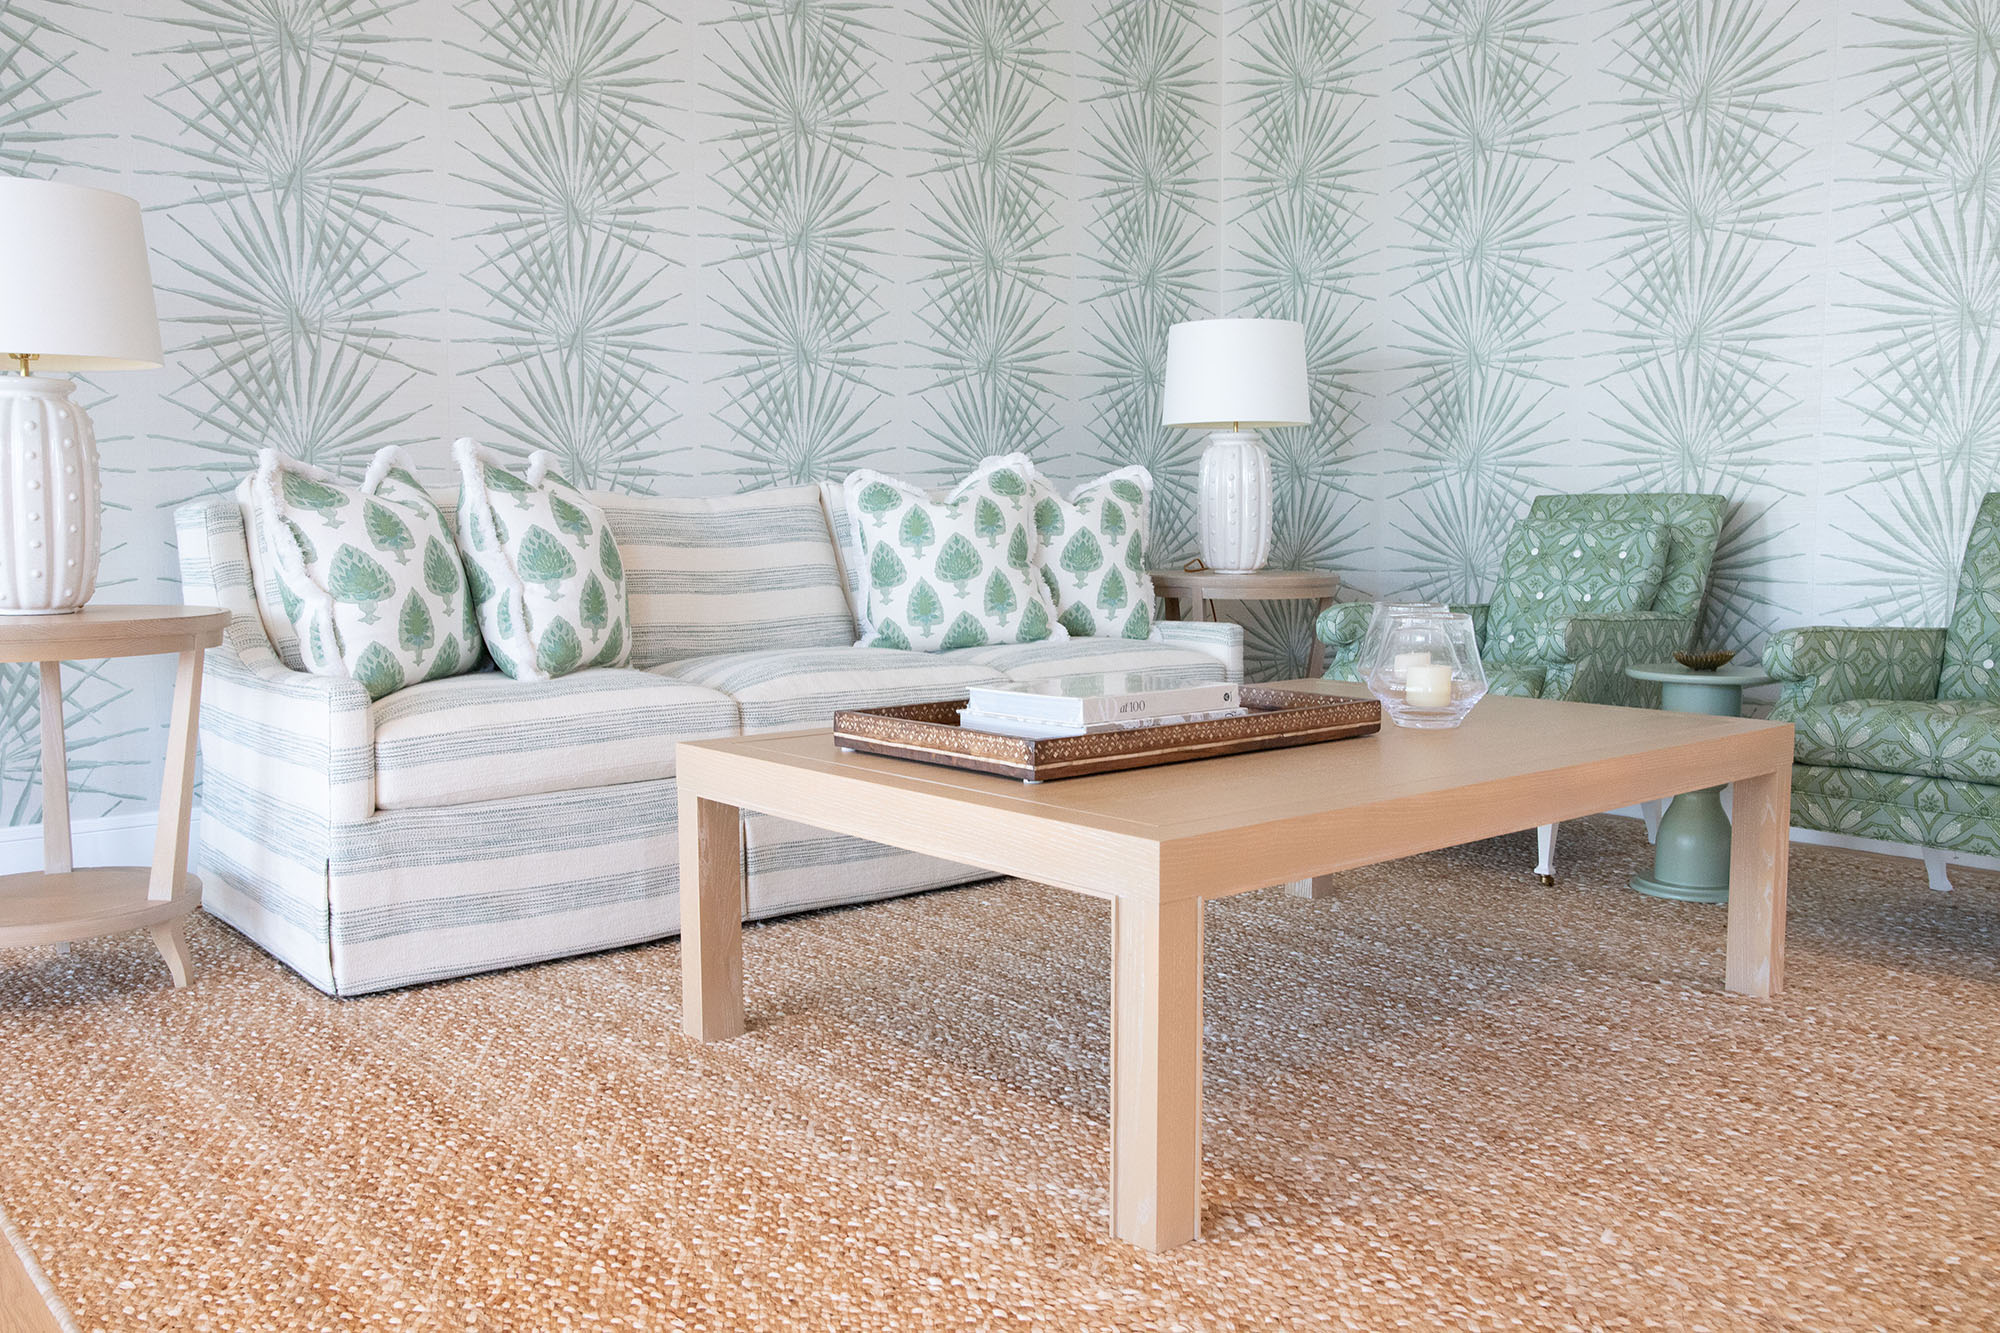 image of hive trade showroom living room grouping with palm wallpaper and green and white upholstered sofa and chairs